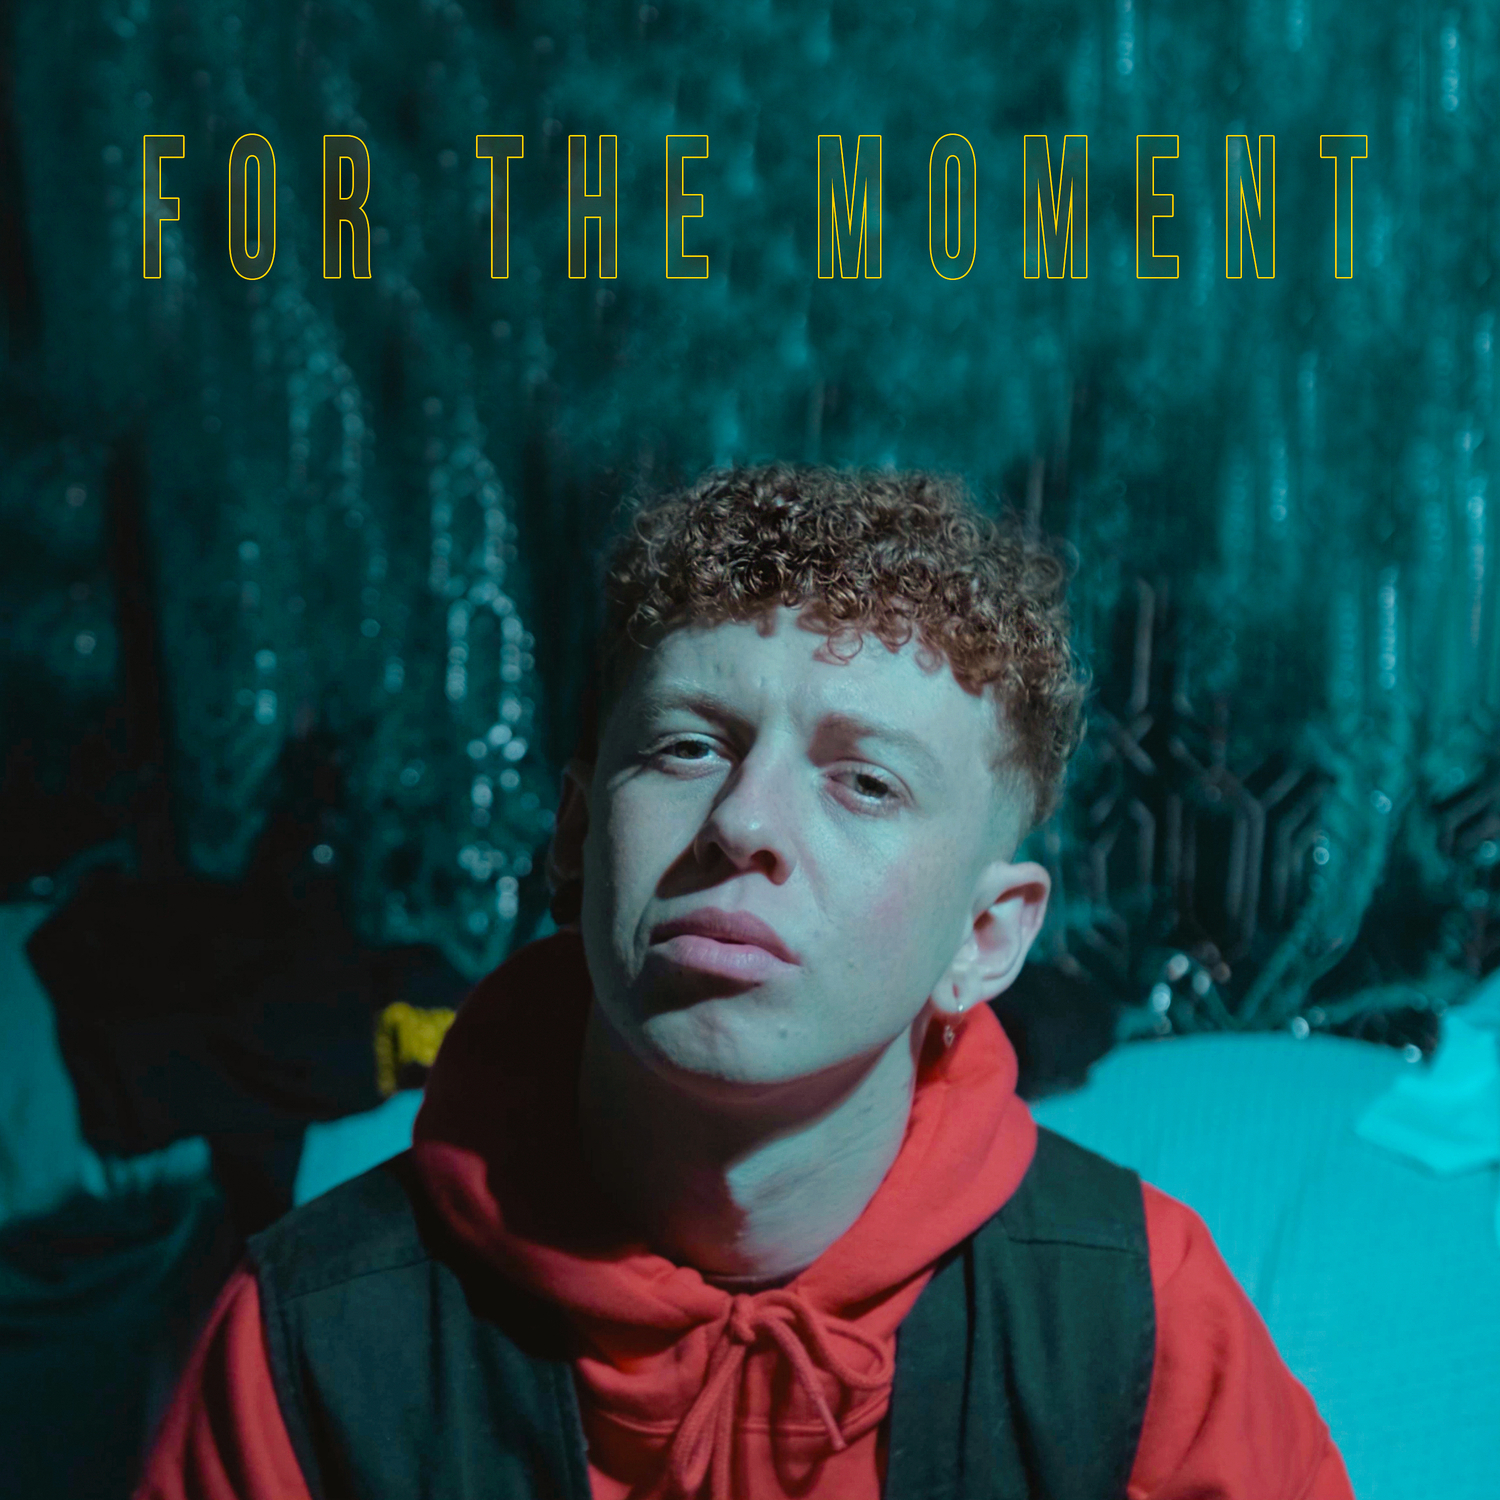 for the moment - reuben hester - UK - united kingdom - indie - indie music - indie pop - indie rock - indie folk - new music - music blog - wolf in a suit - wolfinasuit - wolf in a suit blog - wolf in a suit music blog